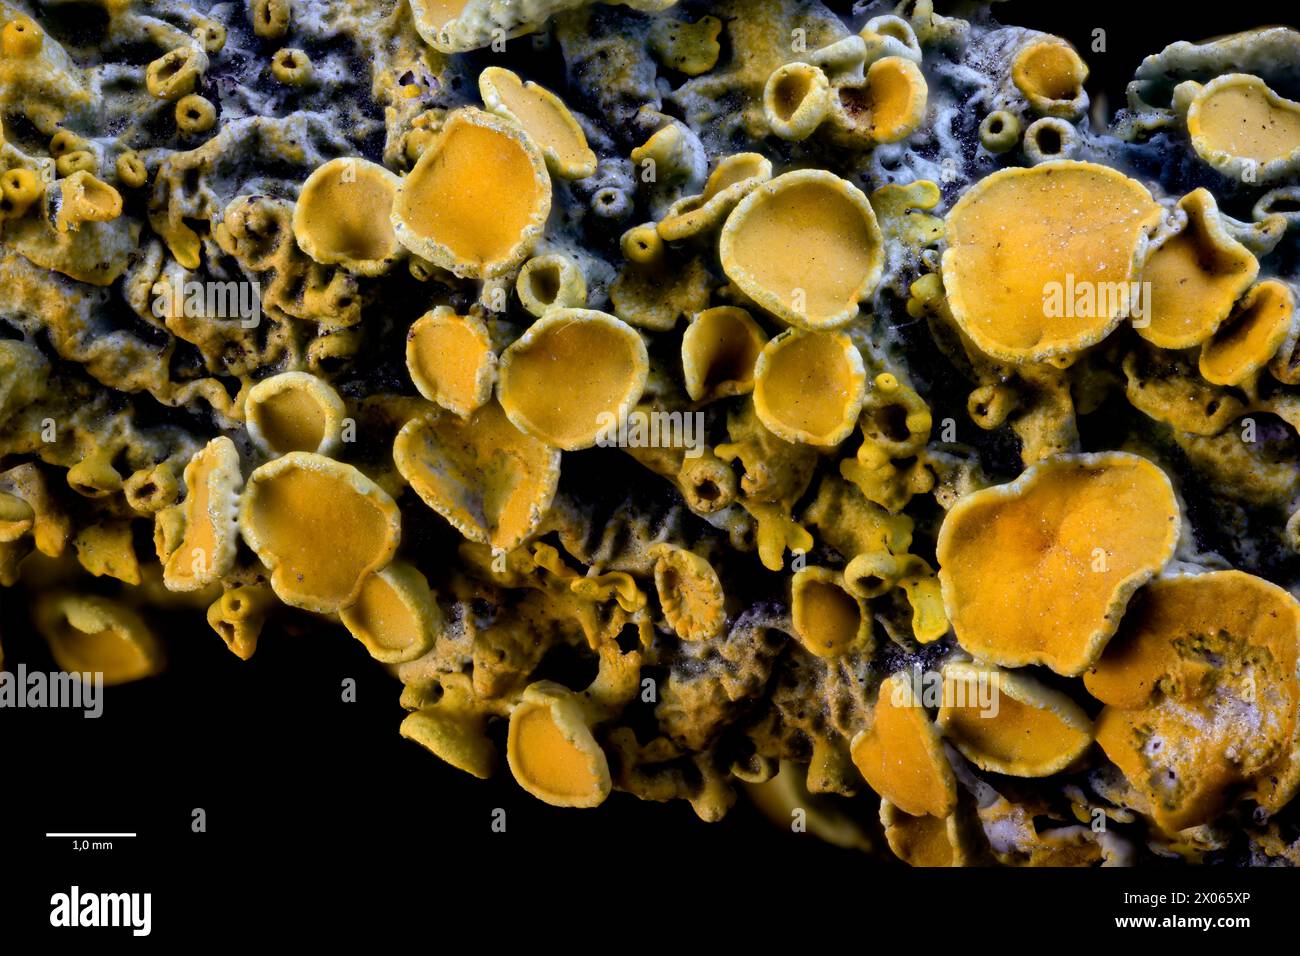 Common orange lichen (Xanthoria parietina) with several ascocarpsw (ascomata or fruting bodies) growing on a tree branch in south-western Norway. Stock Photo